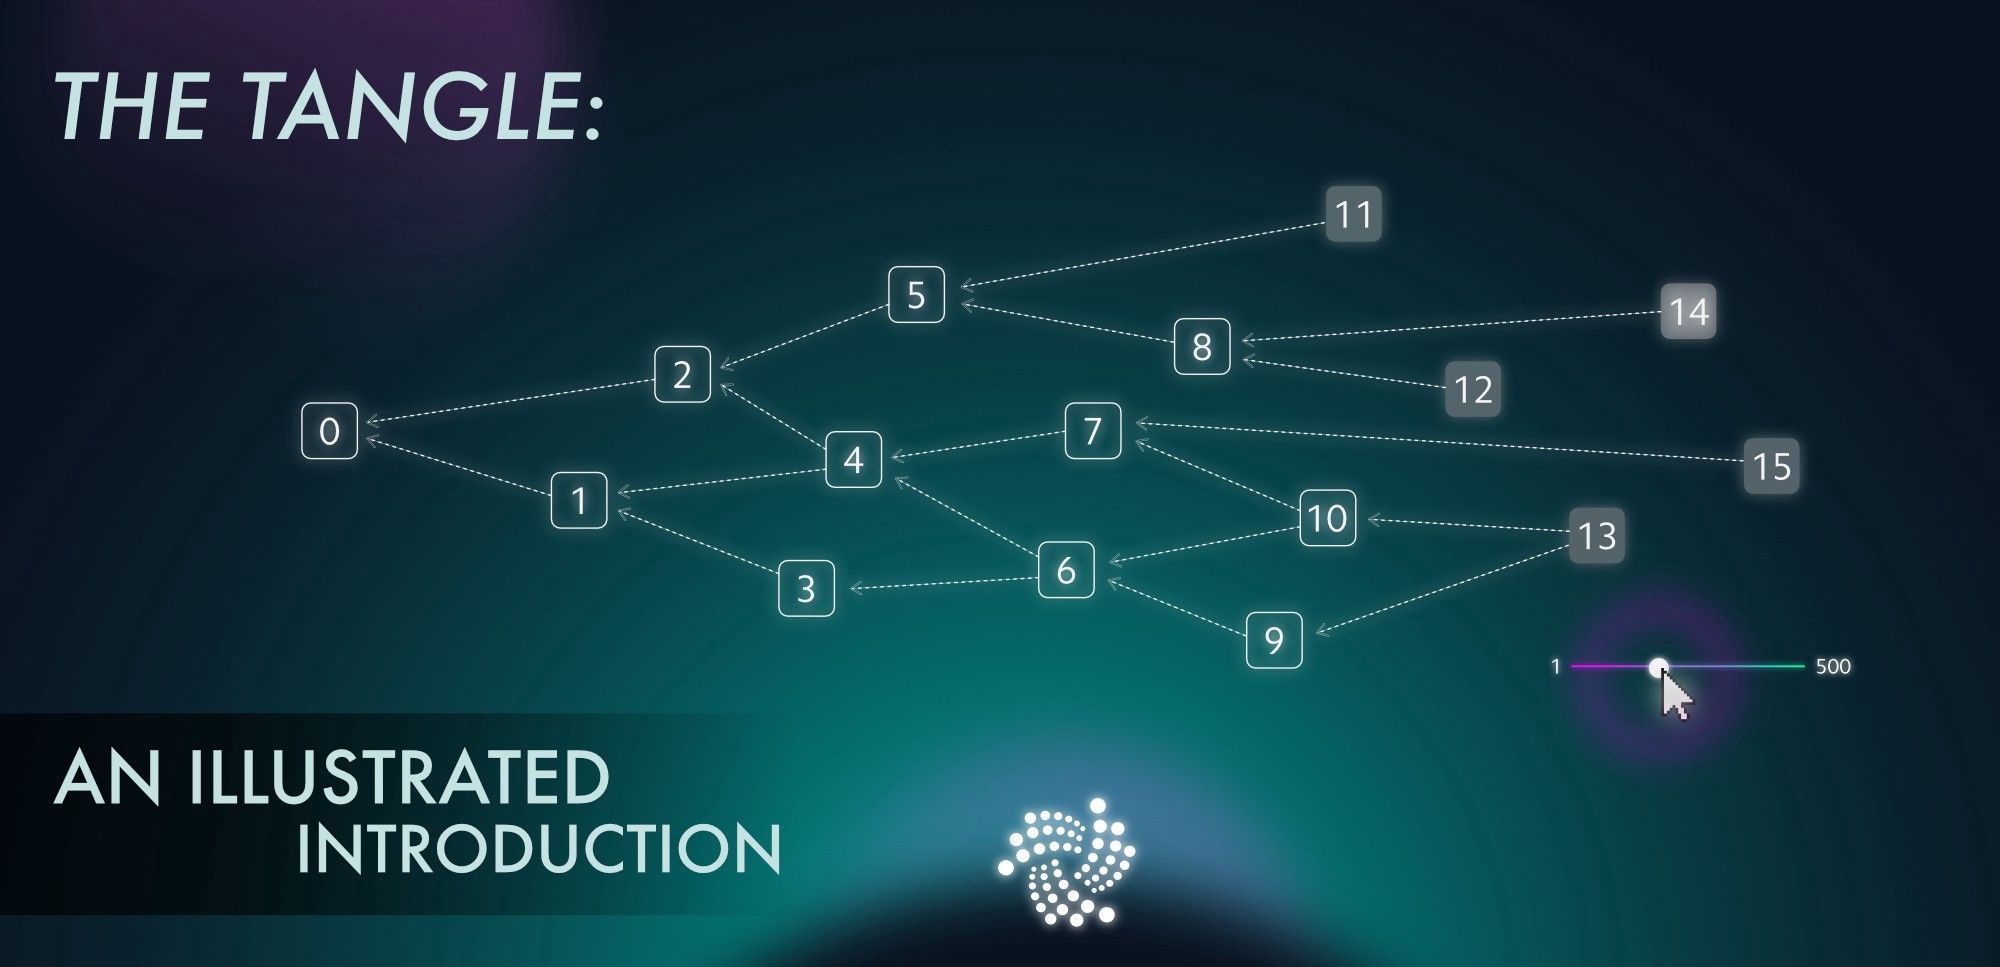 The Tangle: an Illustrated Introduction